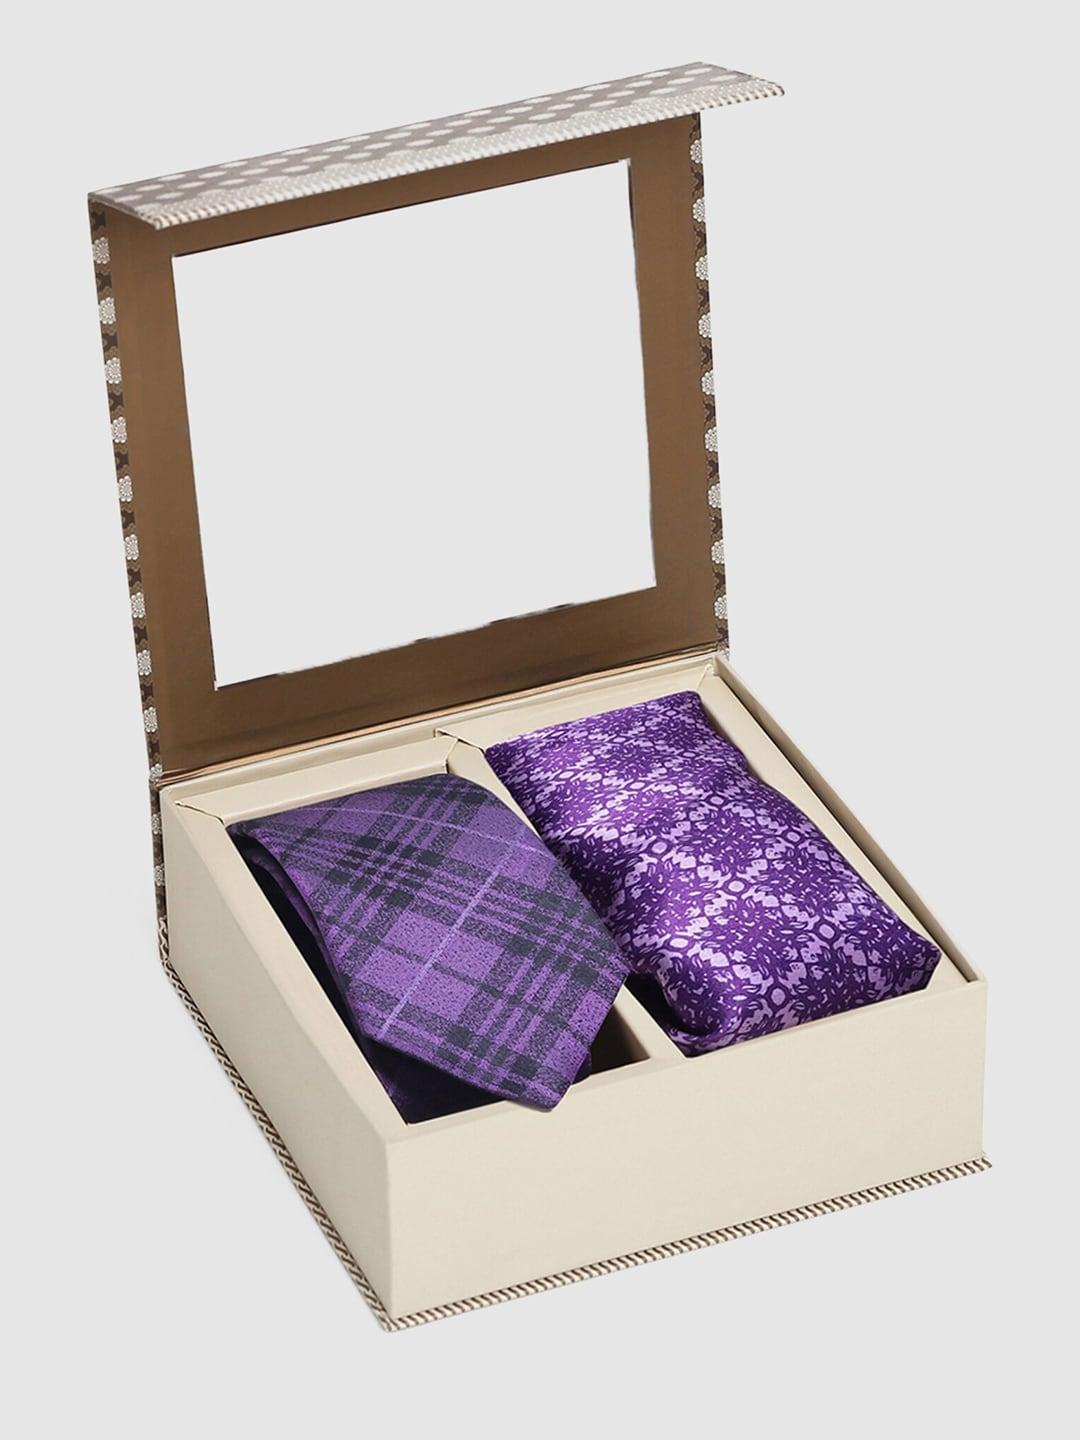 blackberrys printed pure silk tie with pocket square in box